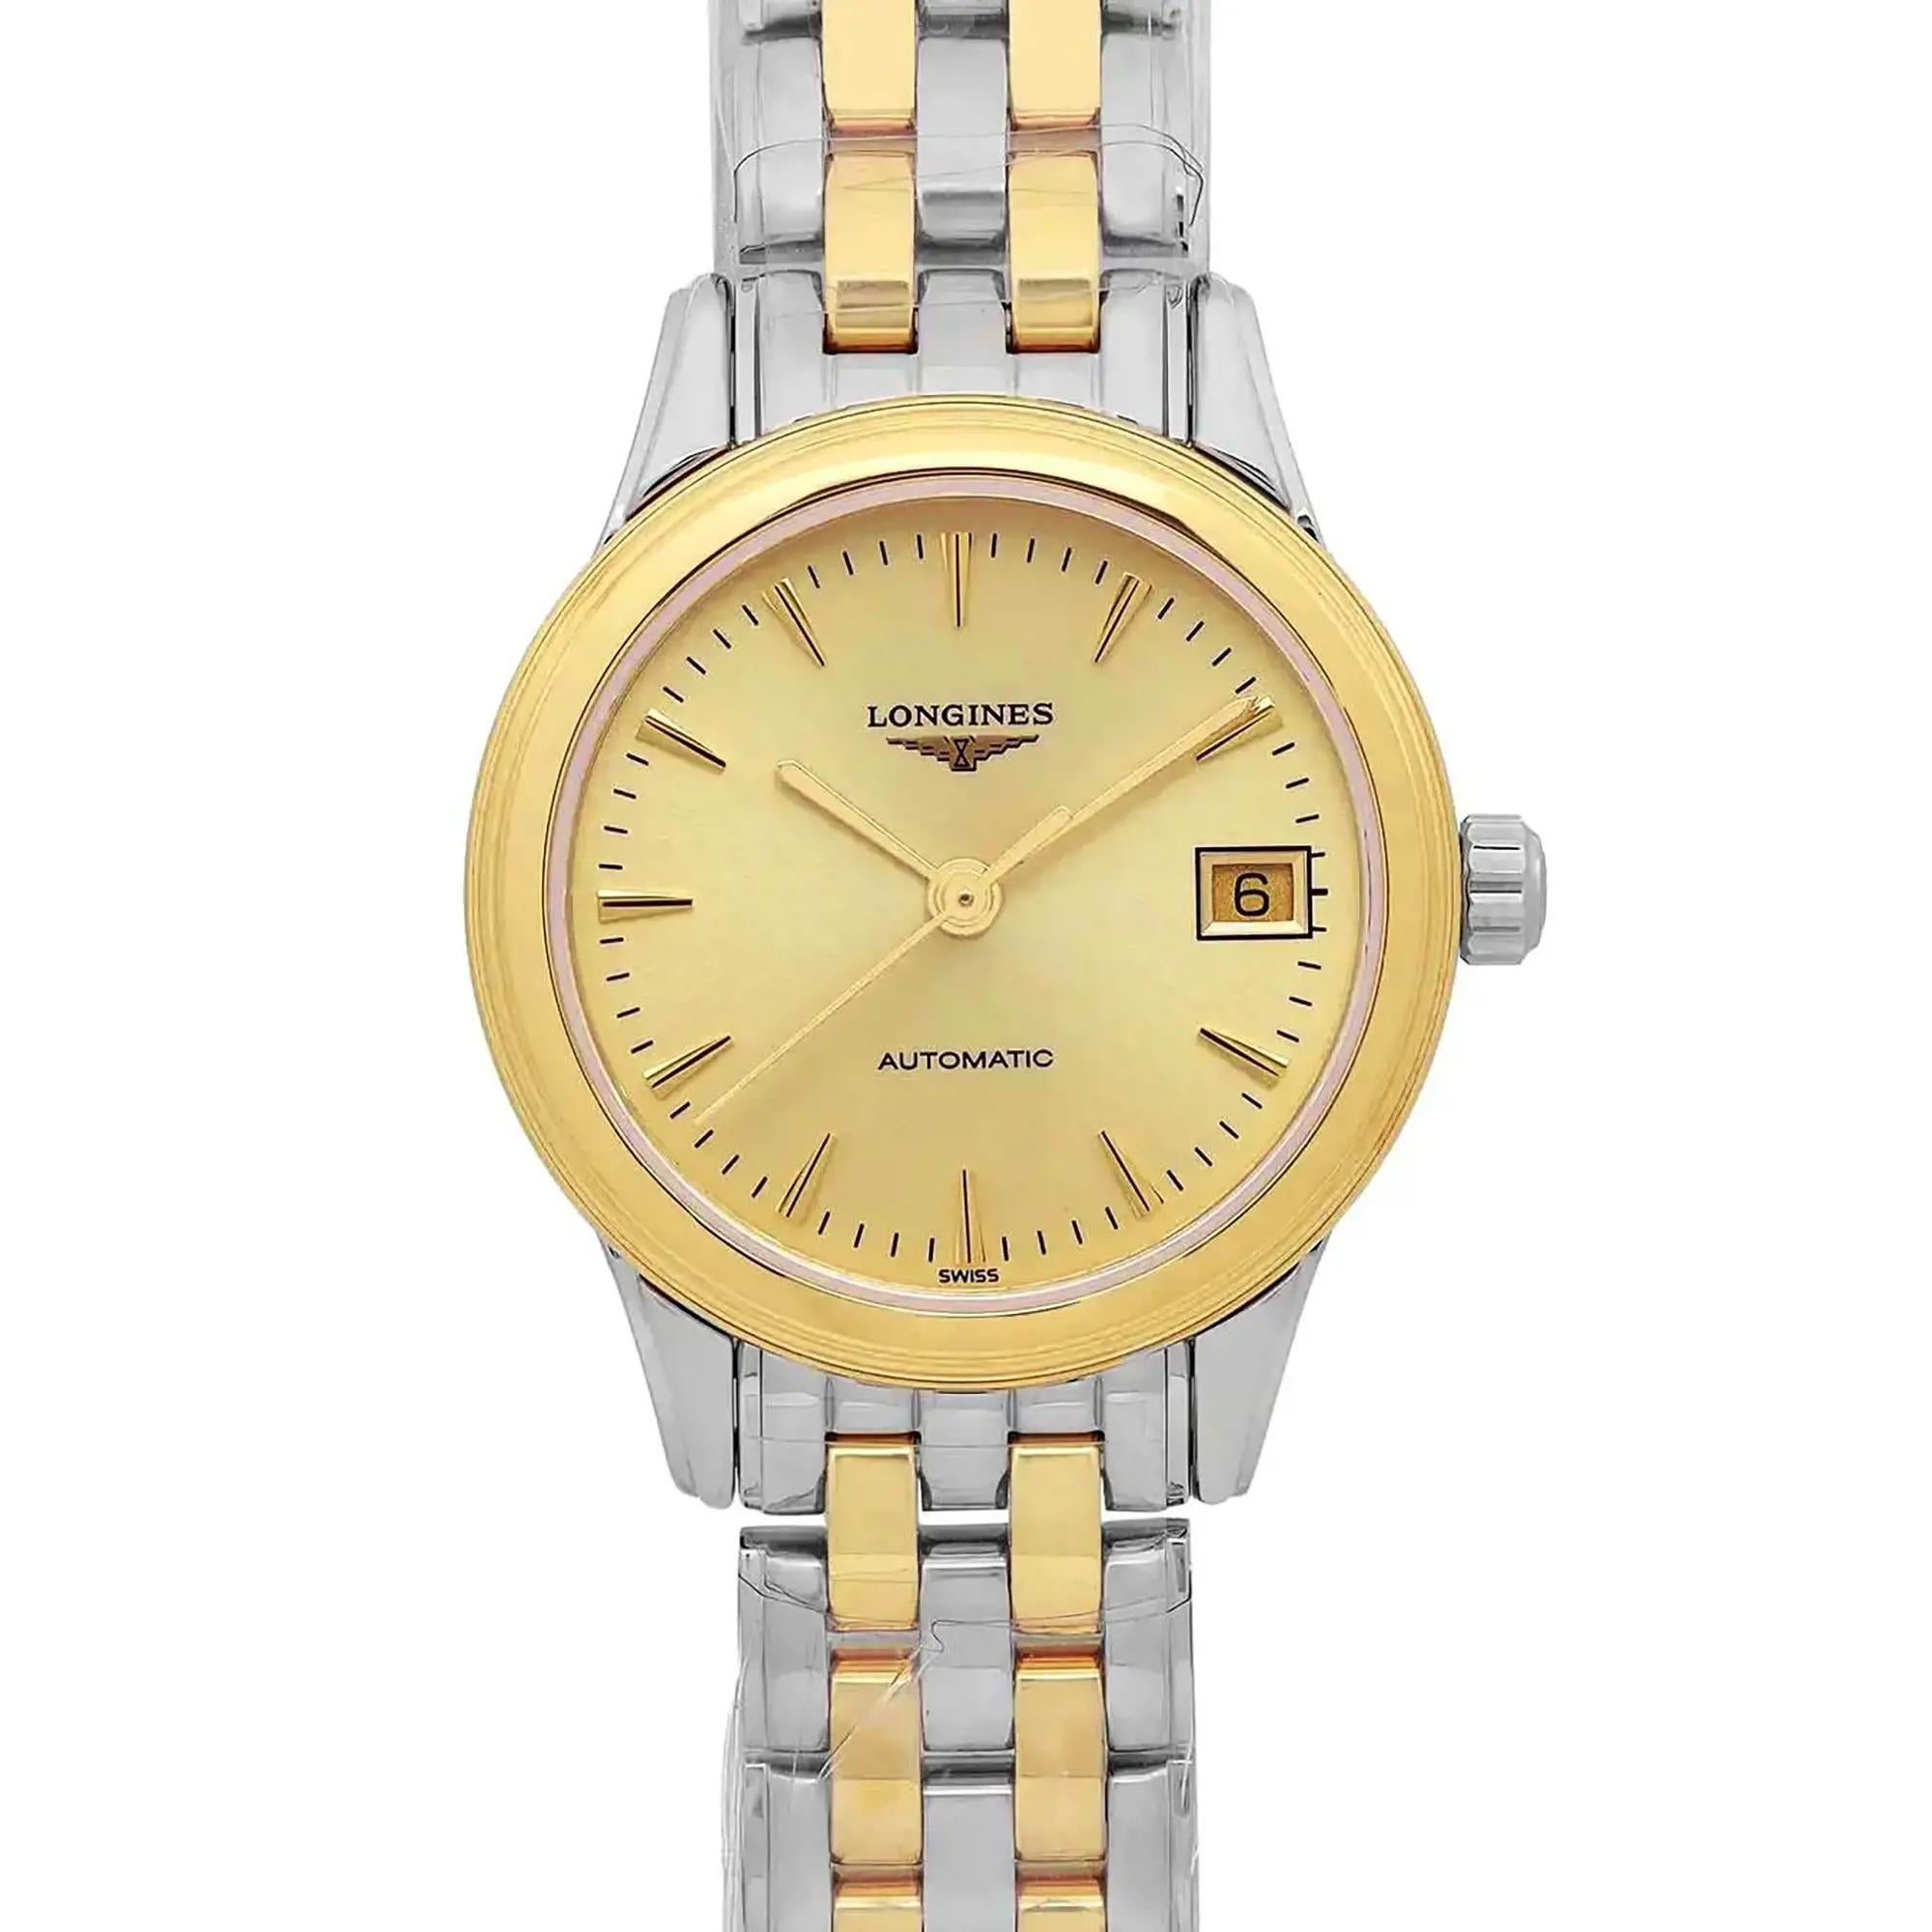 Brand new and comes with original box and papers.

Brand: Longines  Type: Wristwatch  Department: Women  Model Number: L4.274.3.32.7  Country/Region of Manufacture: Switzerland  Style: Casual  Model: Longines Flagship  Vintage: No  Escapement Type: